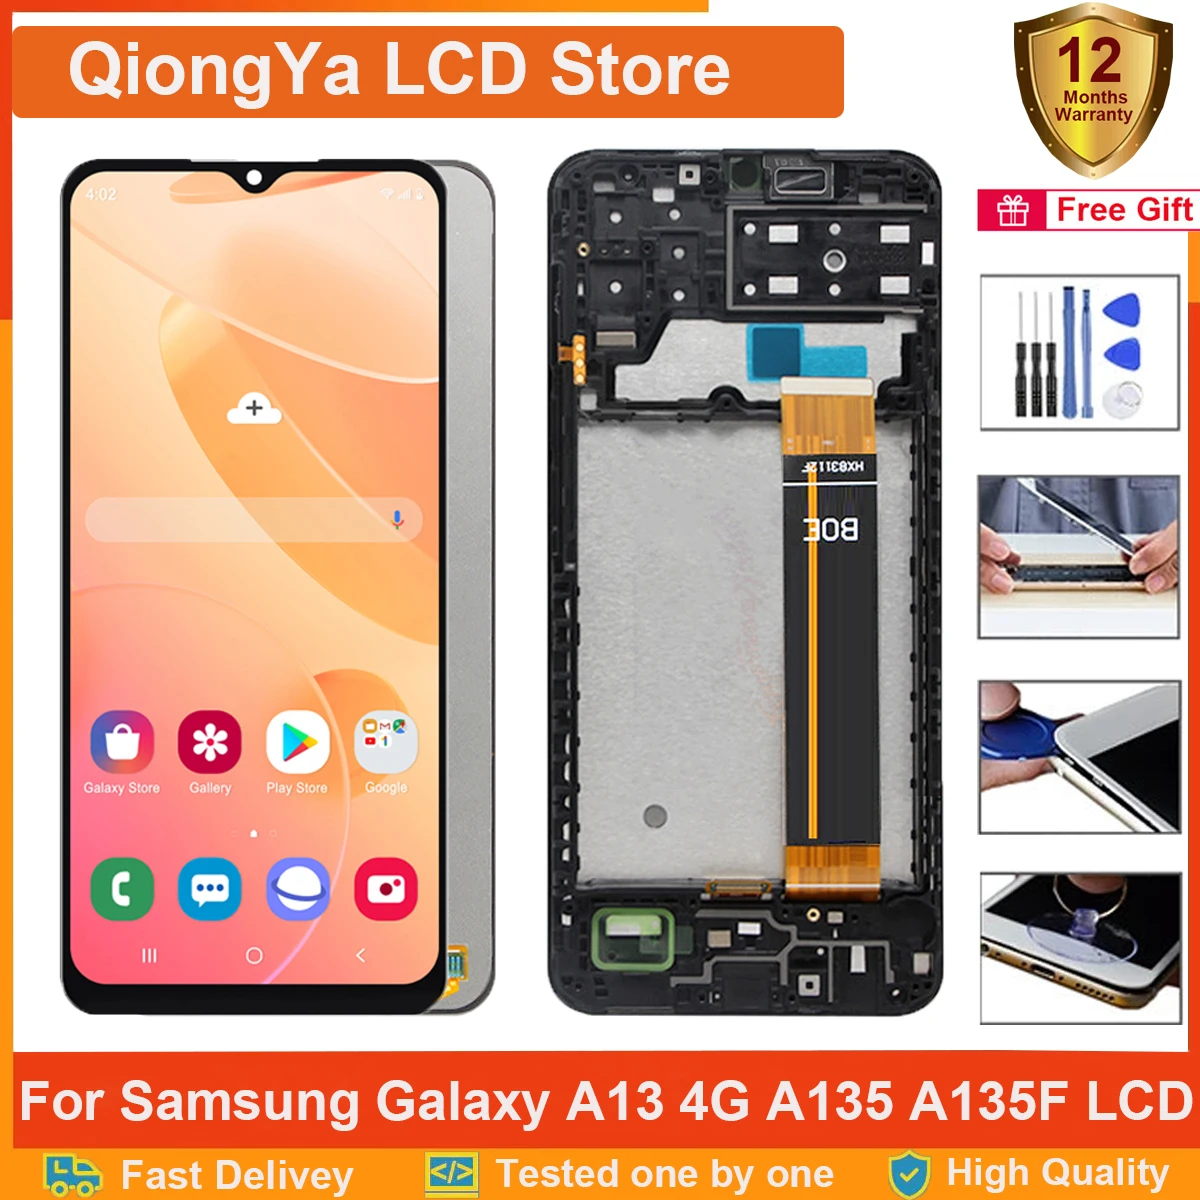 

Original 6.6" A13 4G Display For Samsung Galaxy A13 LTE A135 SM-A135F A135B A135U A135U1 LCD and Touch Screen Digitizer Assembly